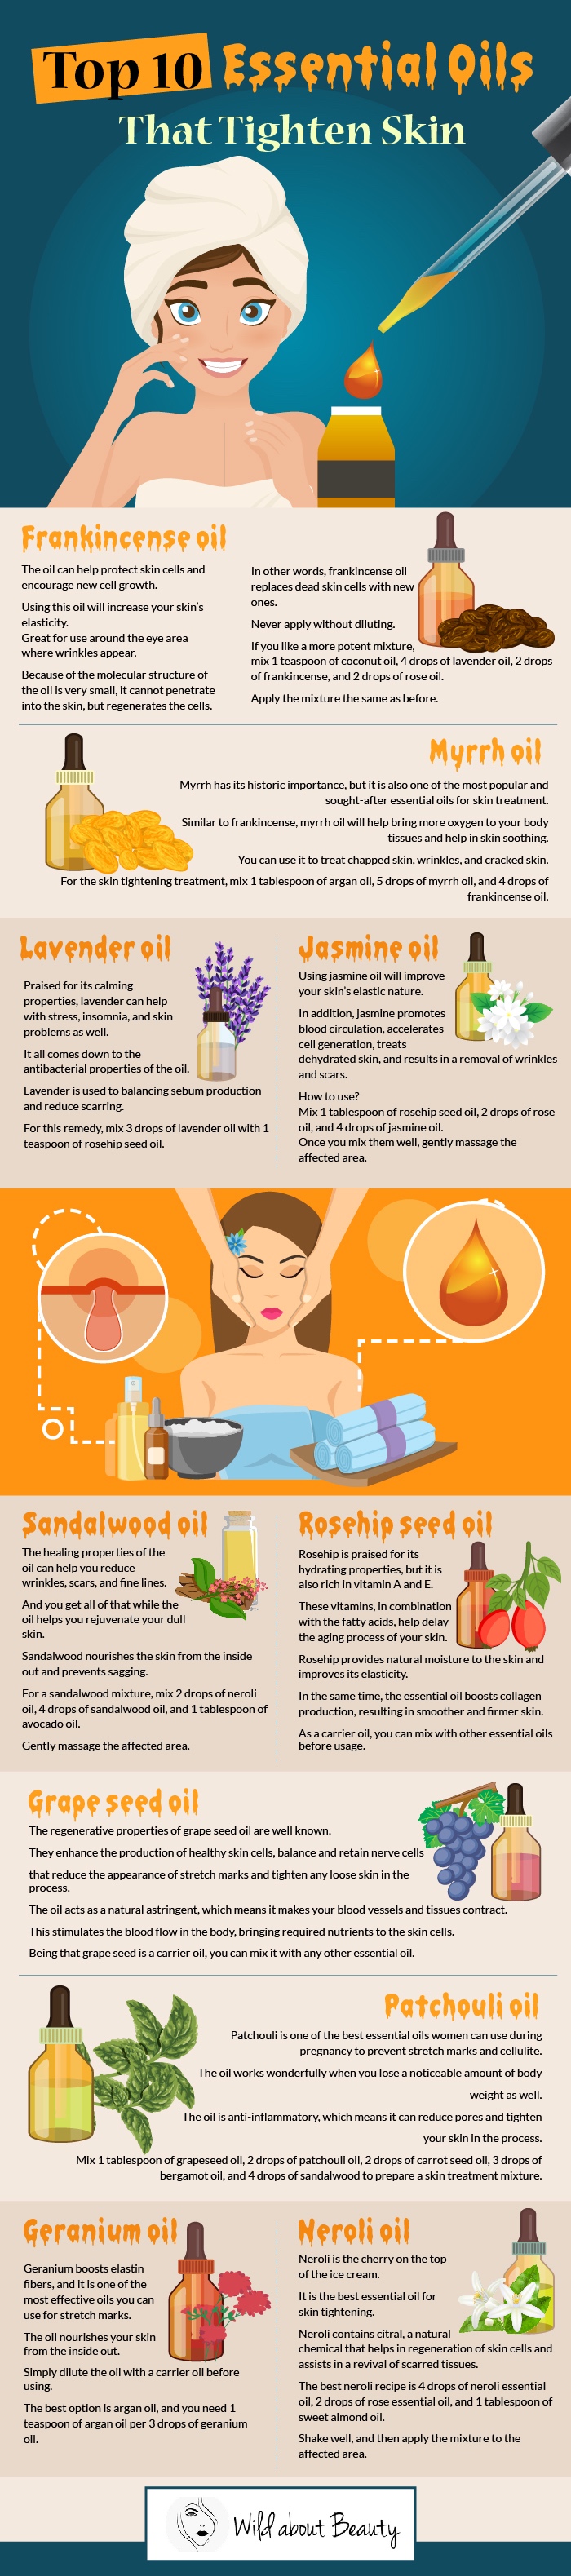 Best Essential Oils For Skin Tightening How To Get Rid Of Saggy Skin